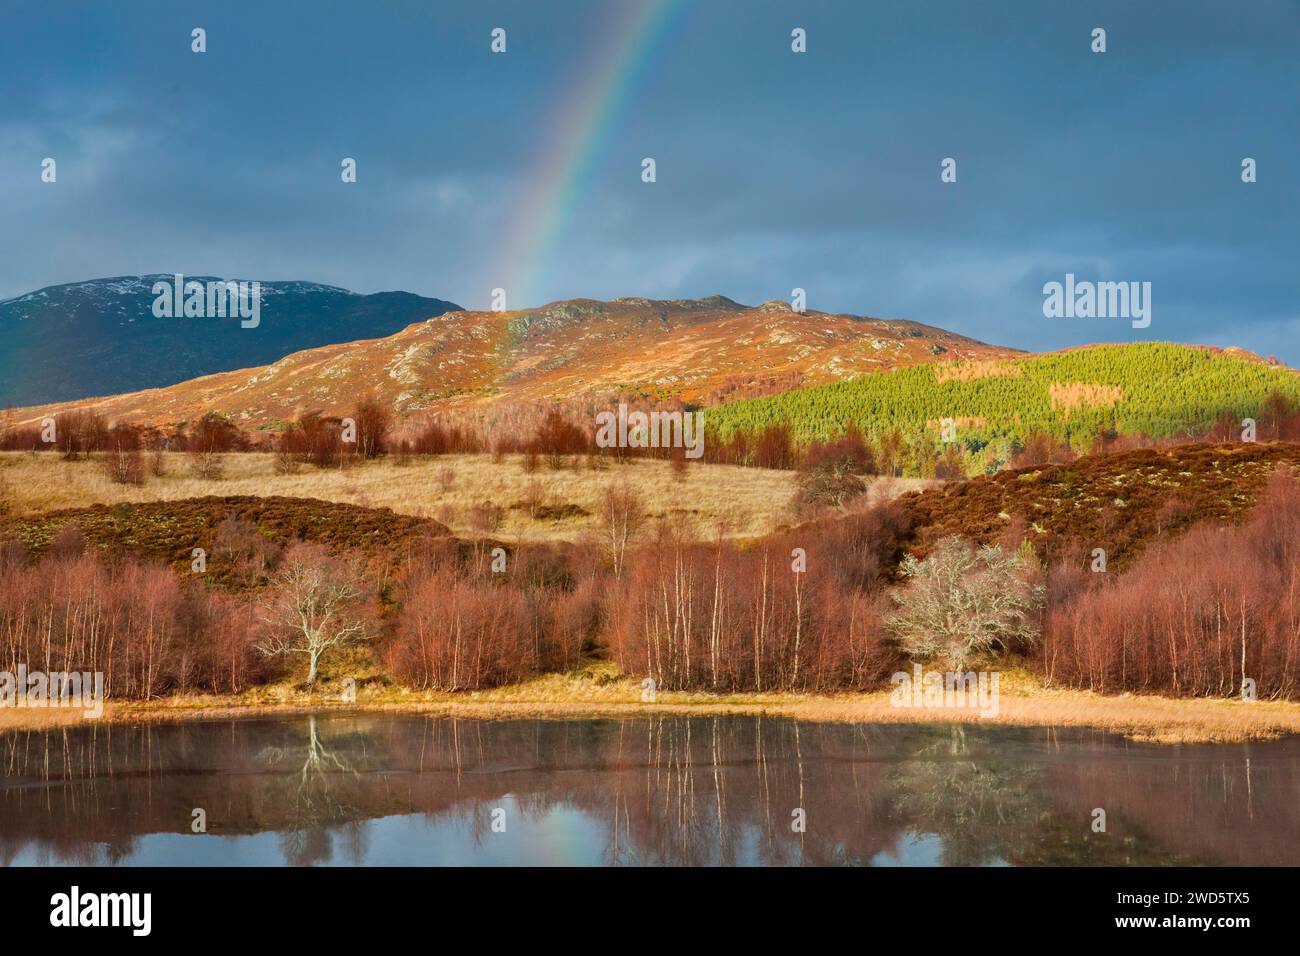 Atmospheric cloudy sky with rainbow over mountainous, partly wooded Highlands in the west of Scotland, with red-branched birch trees at the edge of a Stock Photo